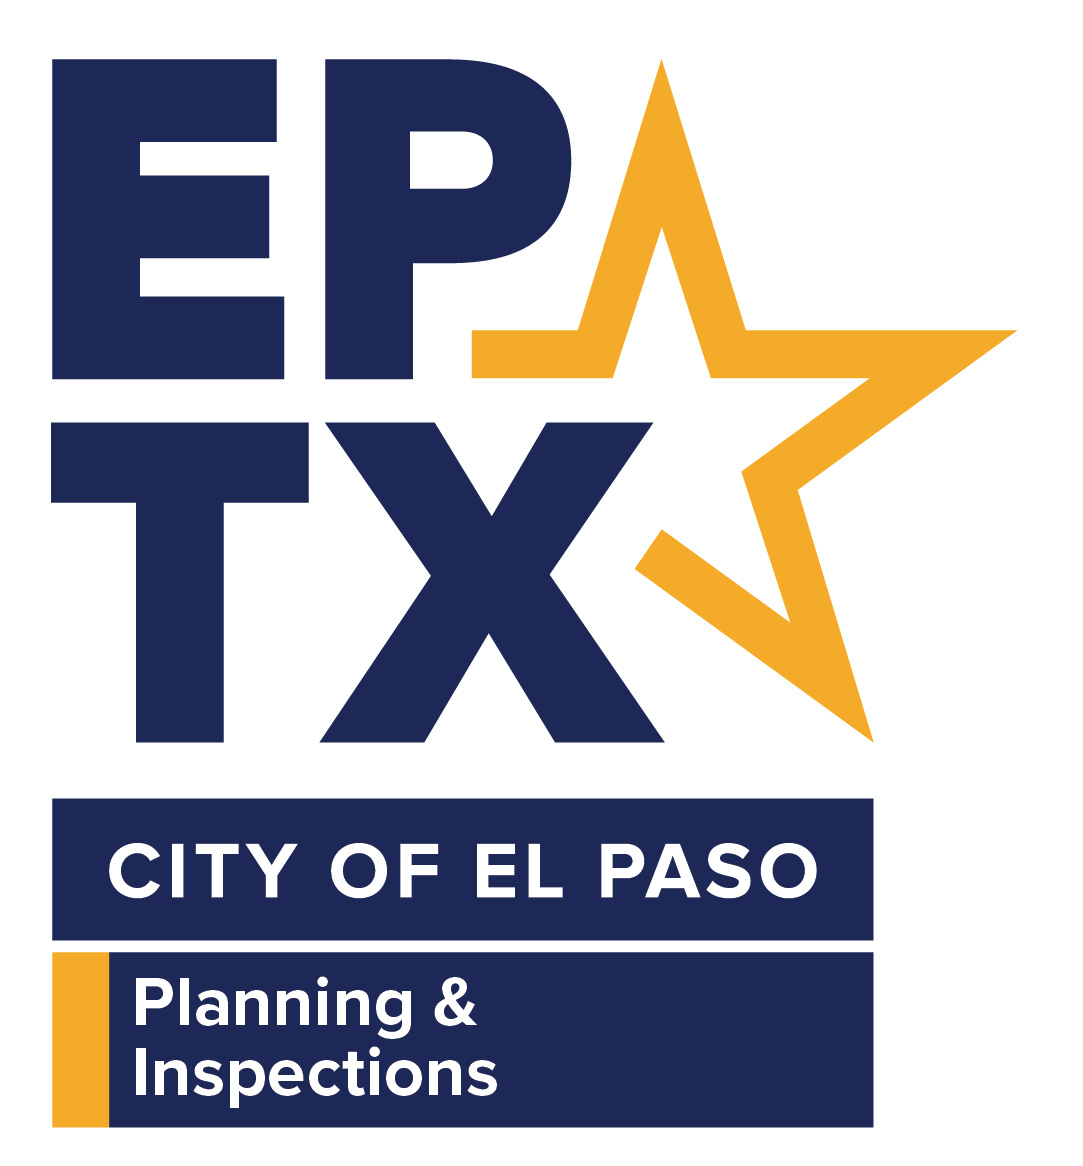 City of El Paso
Planning & Inspections